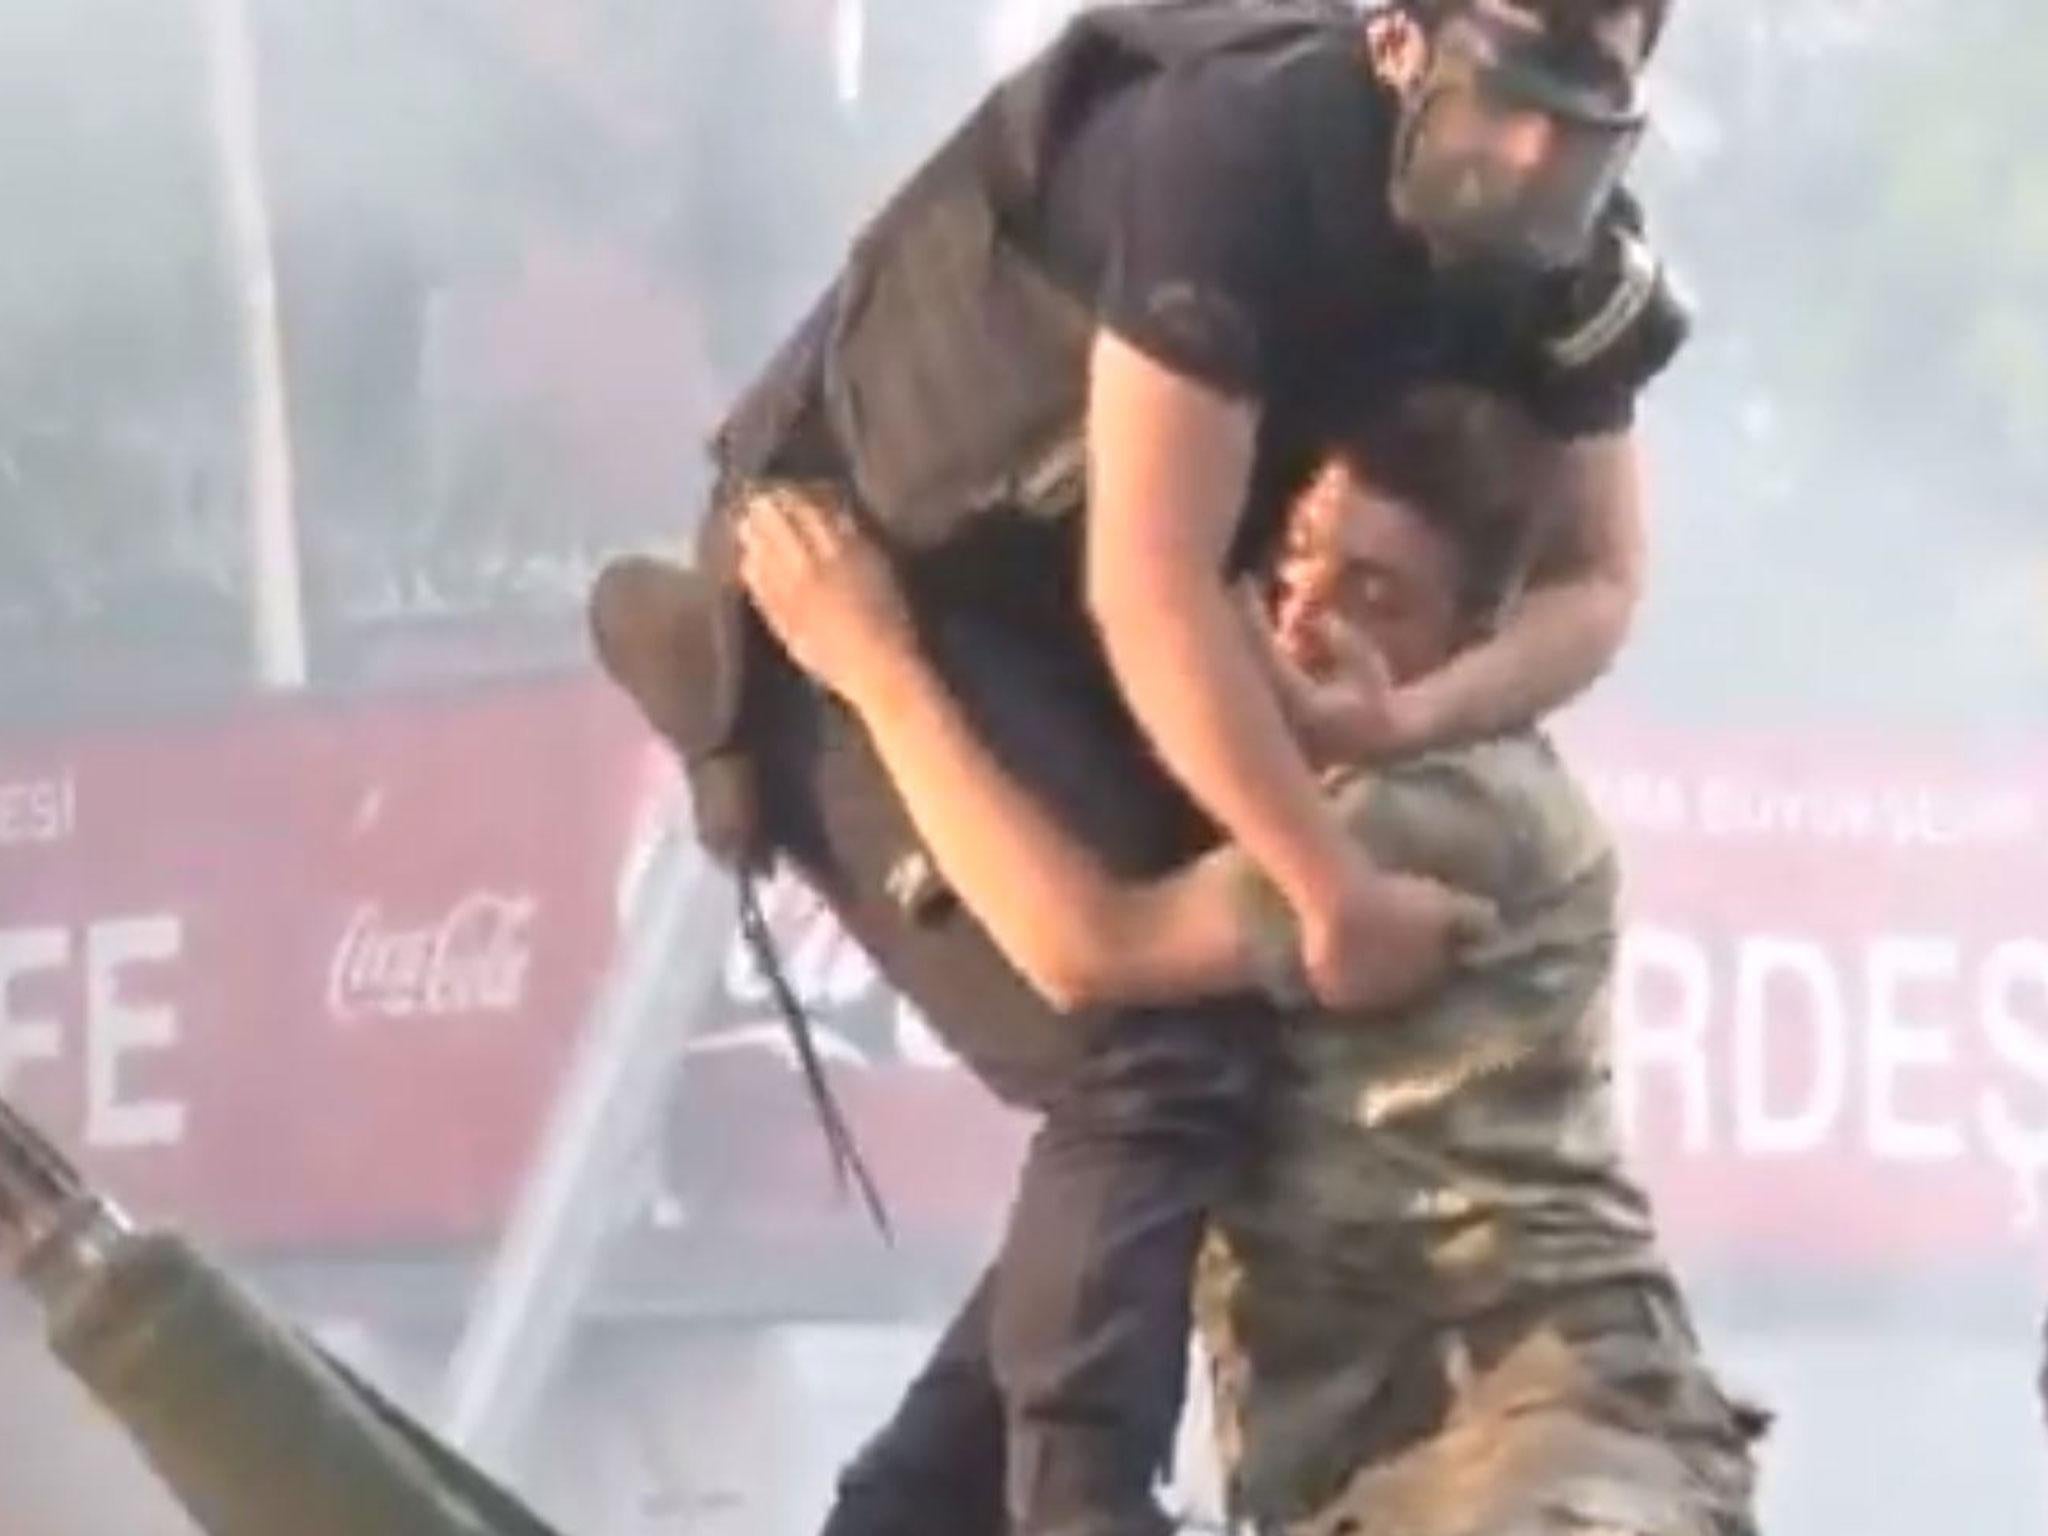 The policeman hugs the soldier